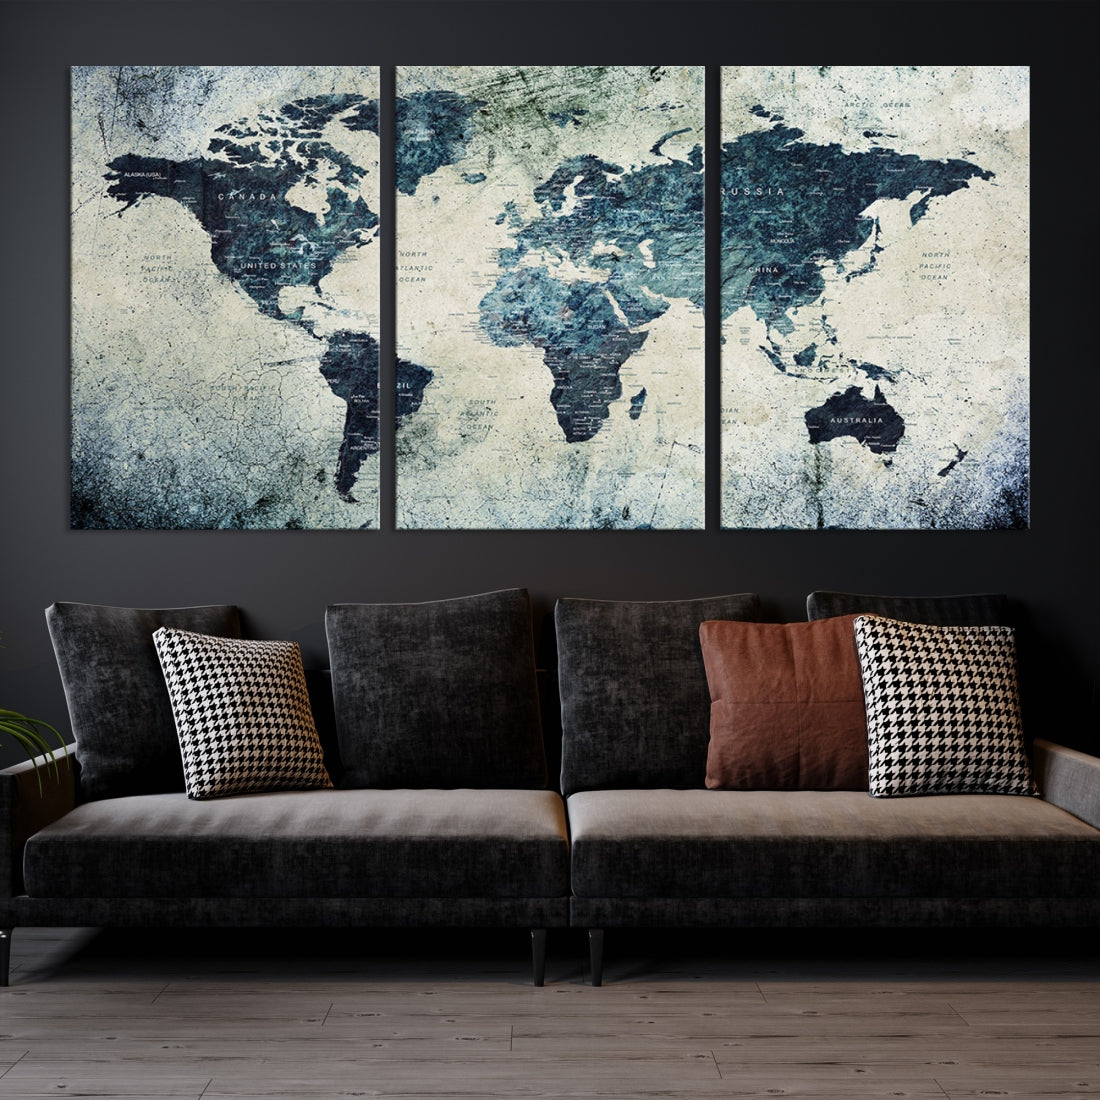 Extra Large World Map Wall Art Watercolor Painting on Canvas Print Grunge Vintage Decor